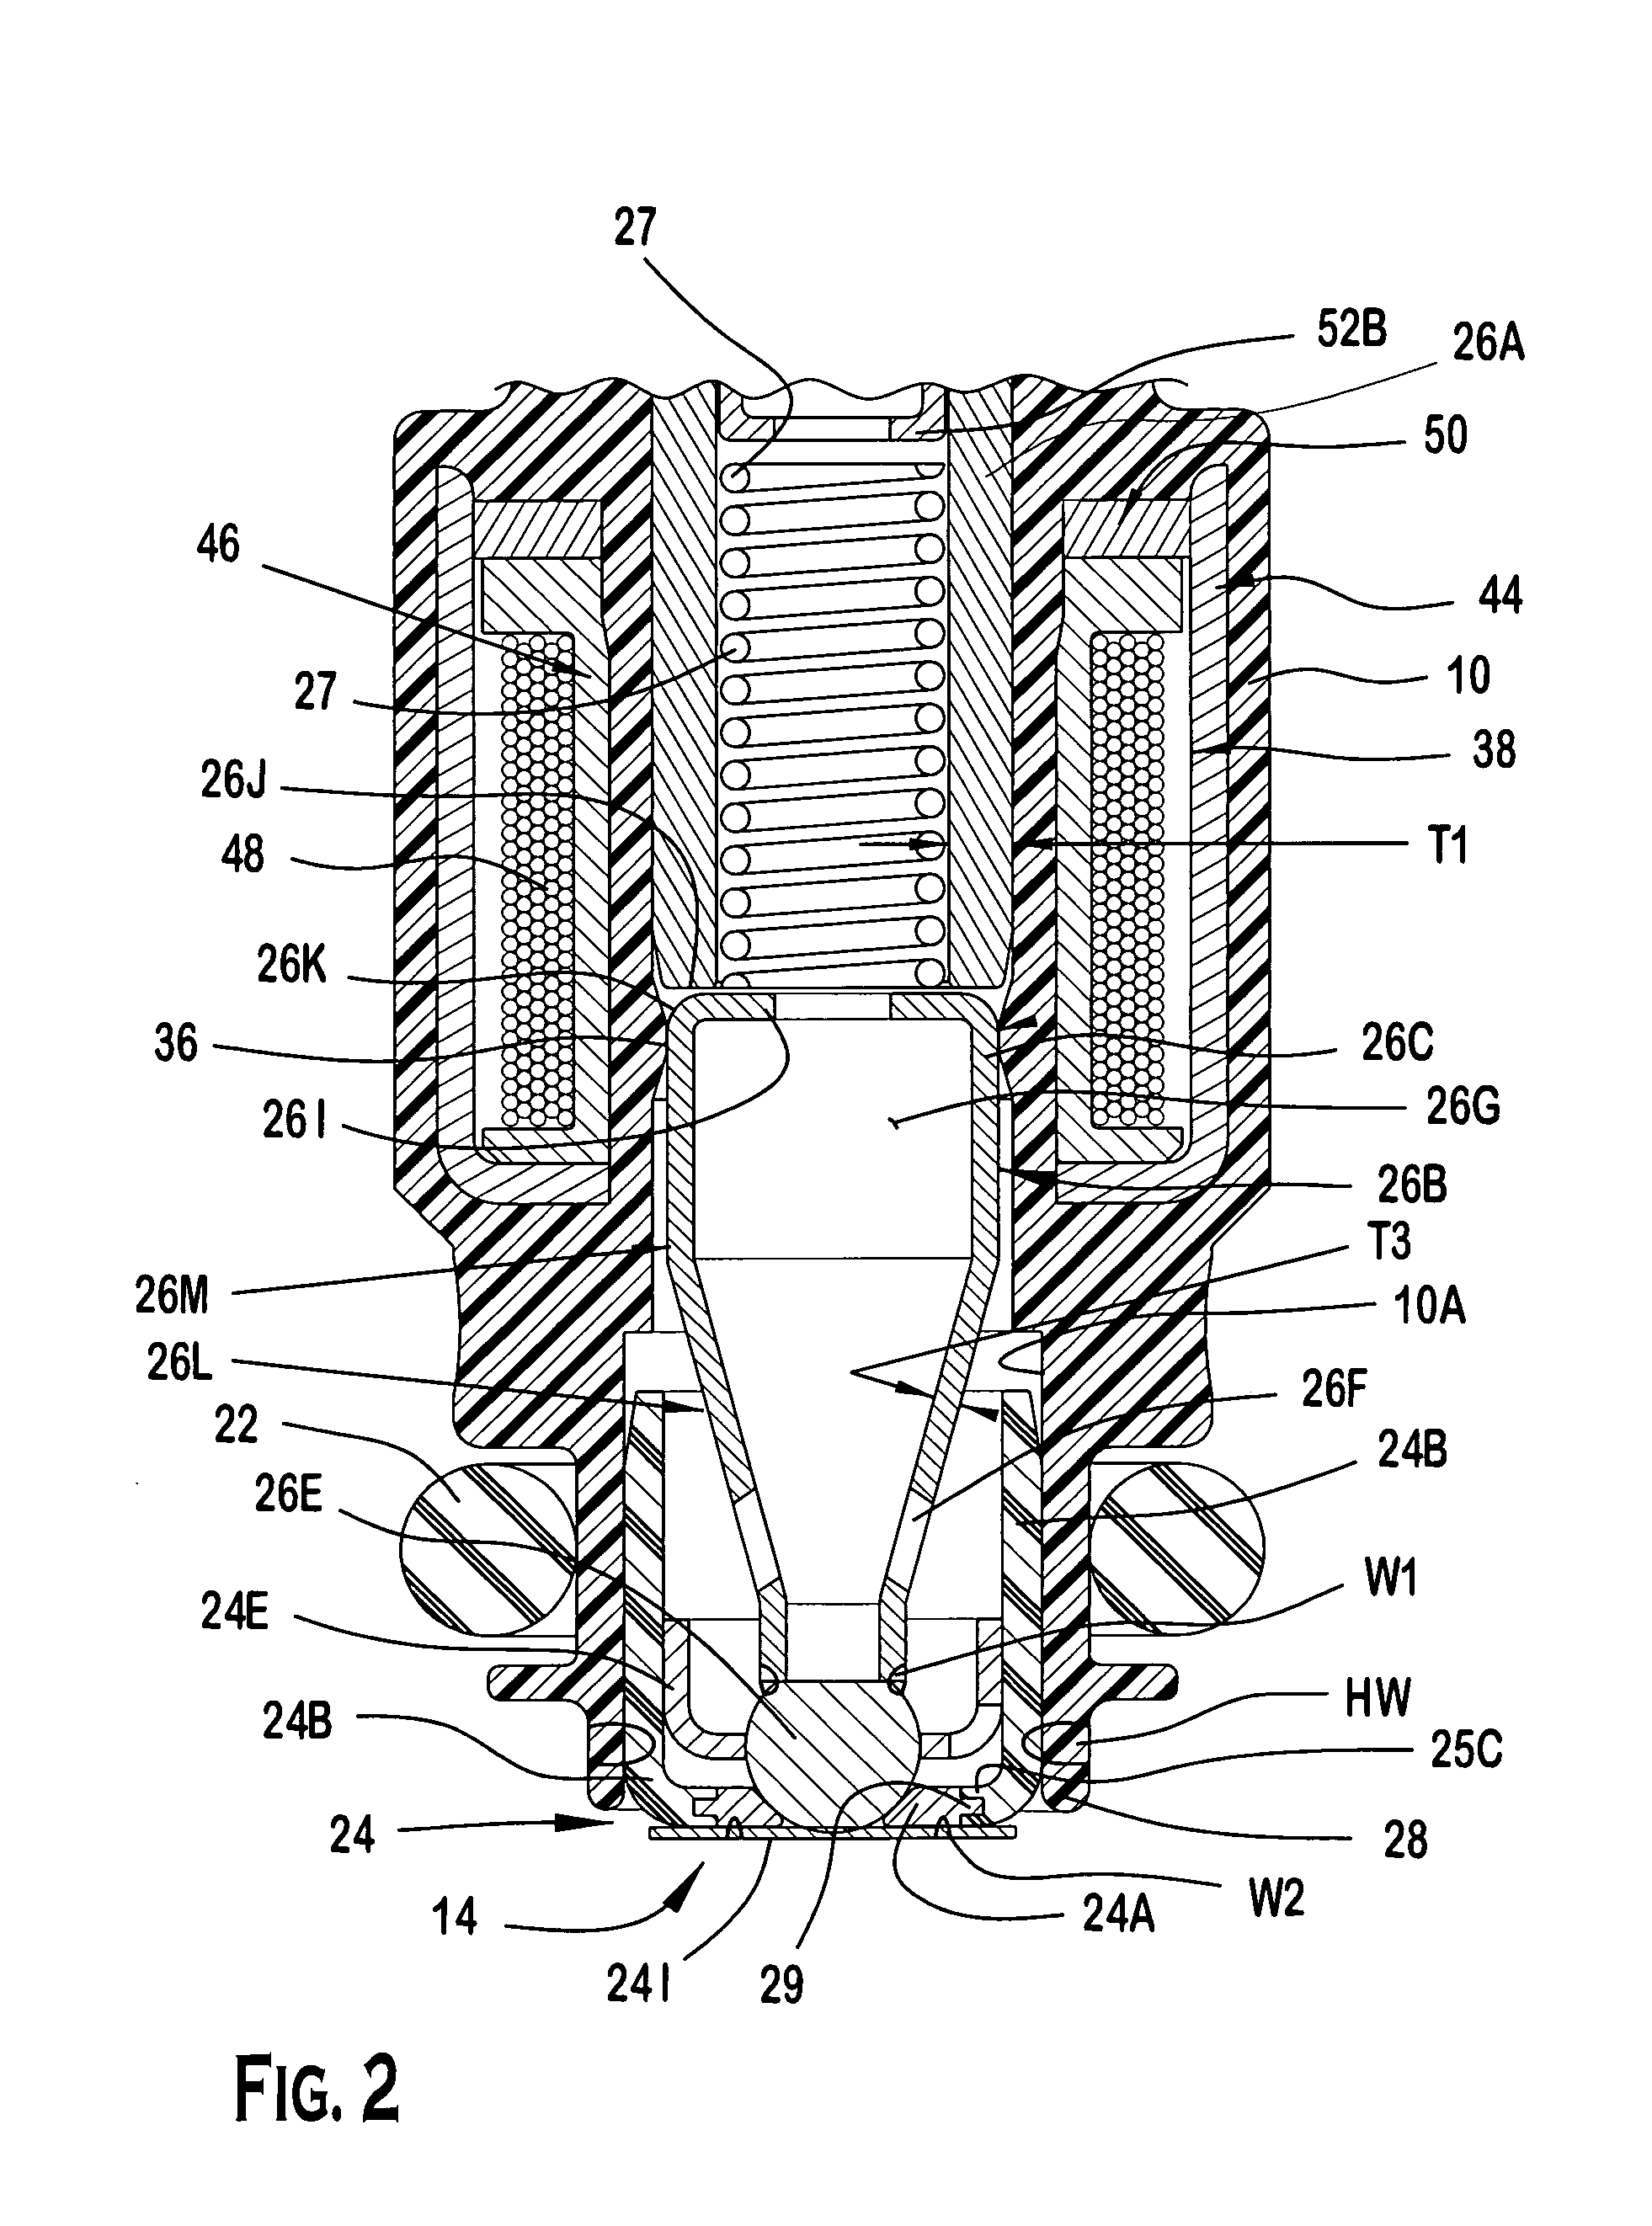 Fuel injector with a metering assembly with a polymeric support member and an orifice disk positioned at a terminal end of the polymeric housing